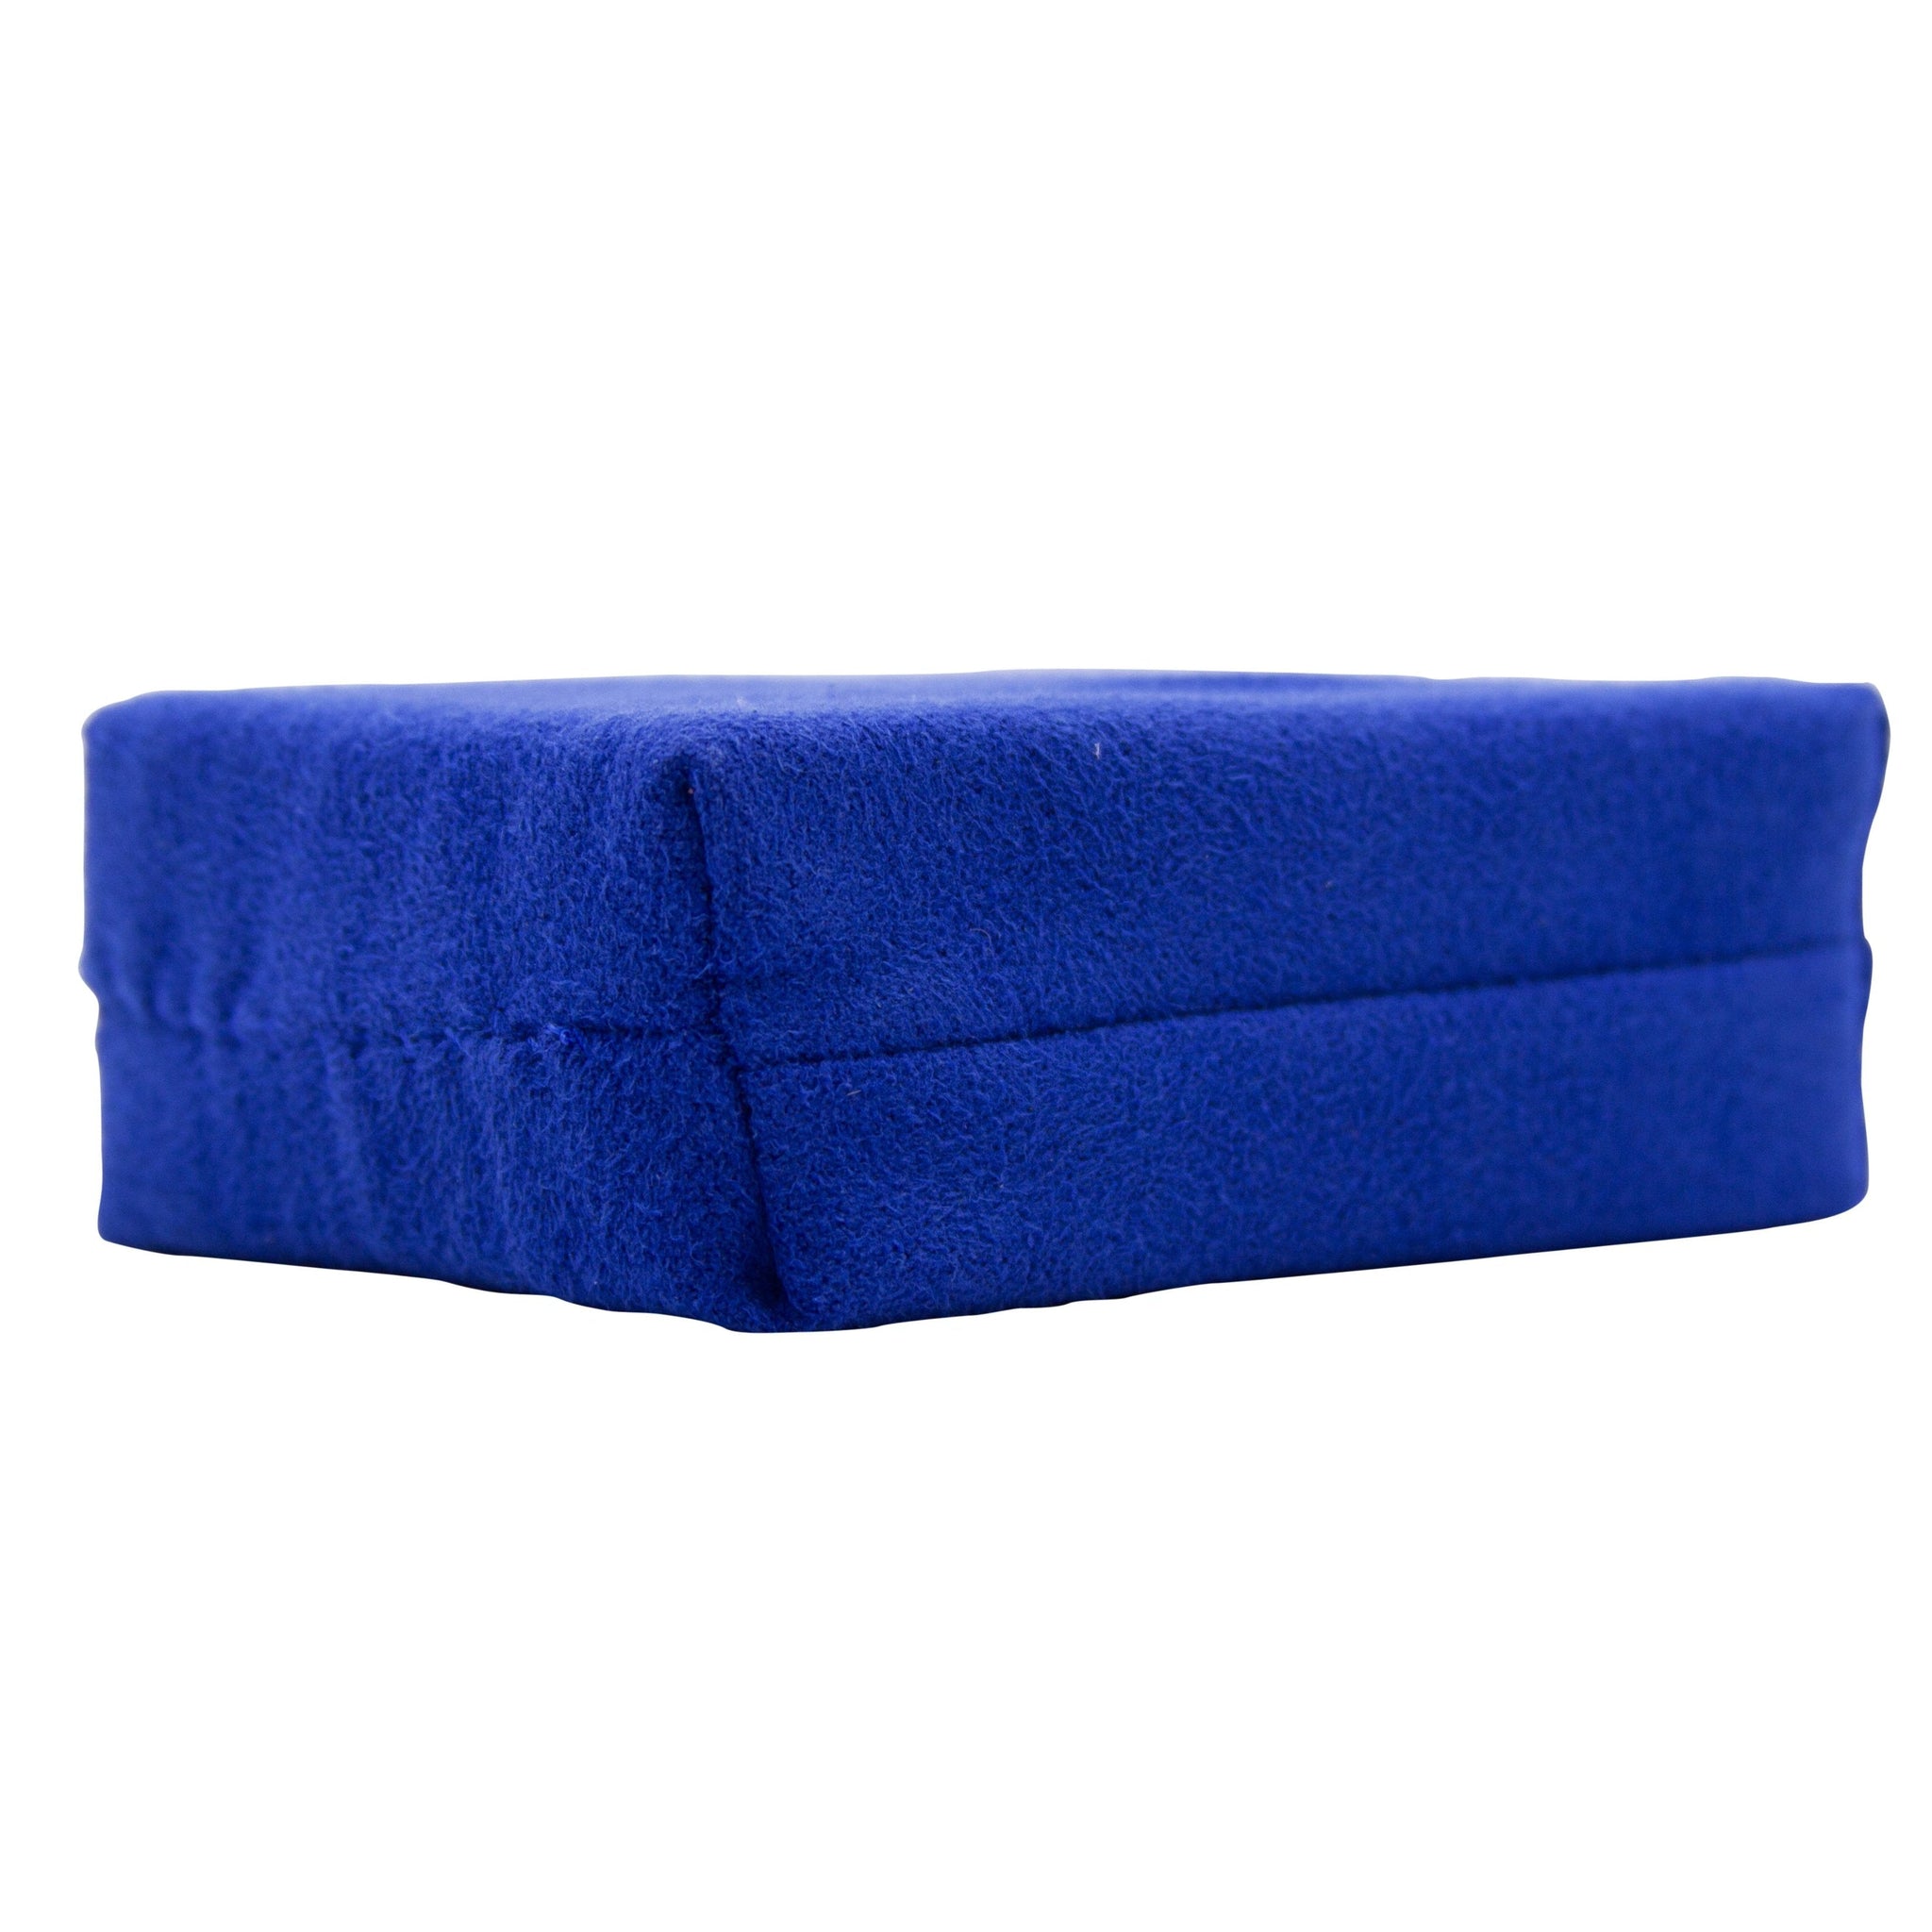  Greenway’s Car Care Products, Super Soft Blue Microfiber Suede Ceramic Coating Applicator, 4” x 2.5” x 1.25”, 2 pack, side view.